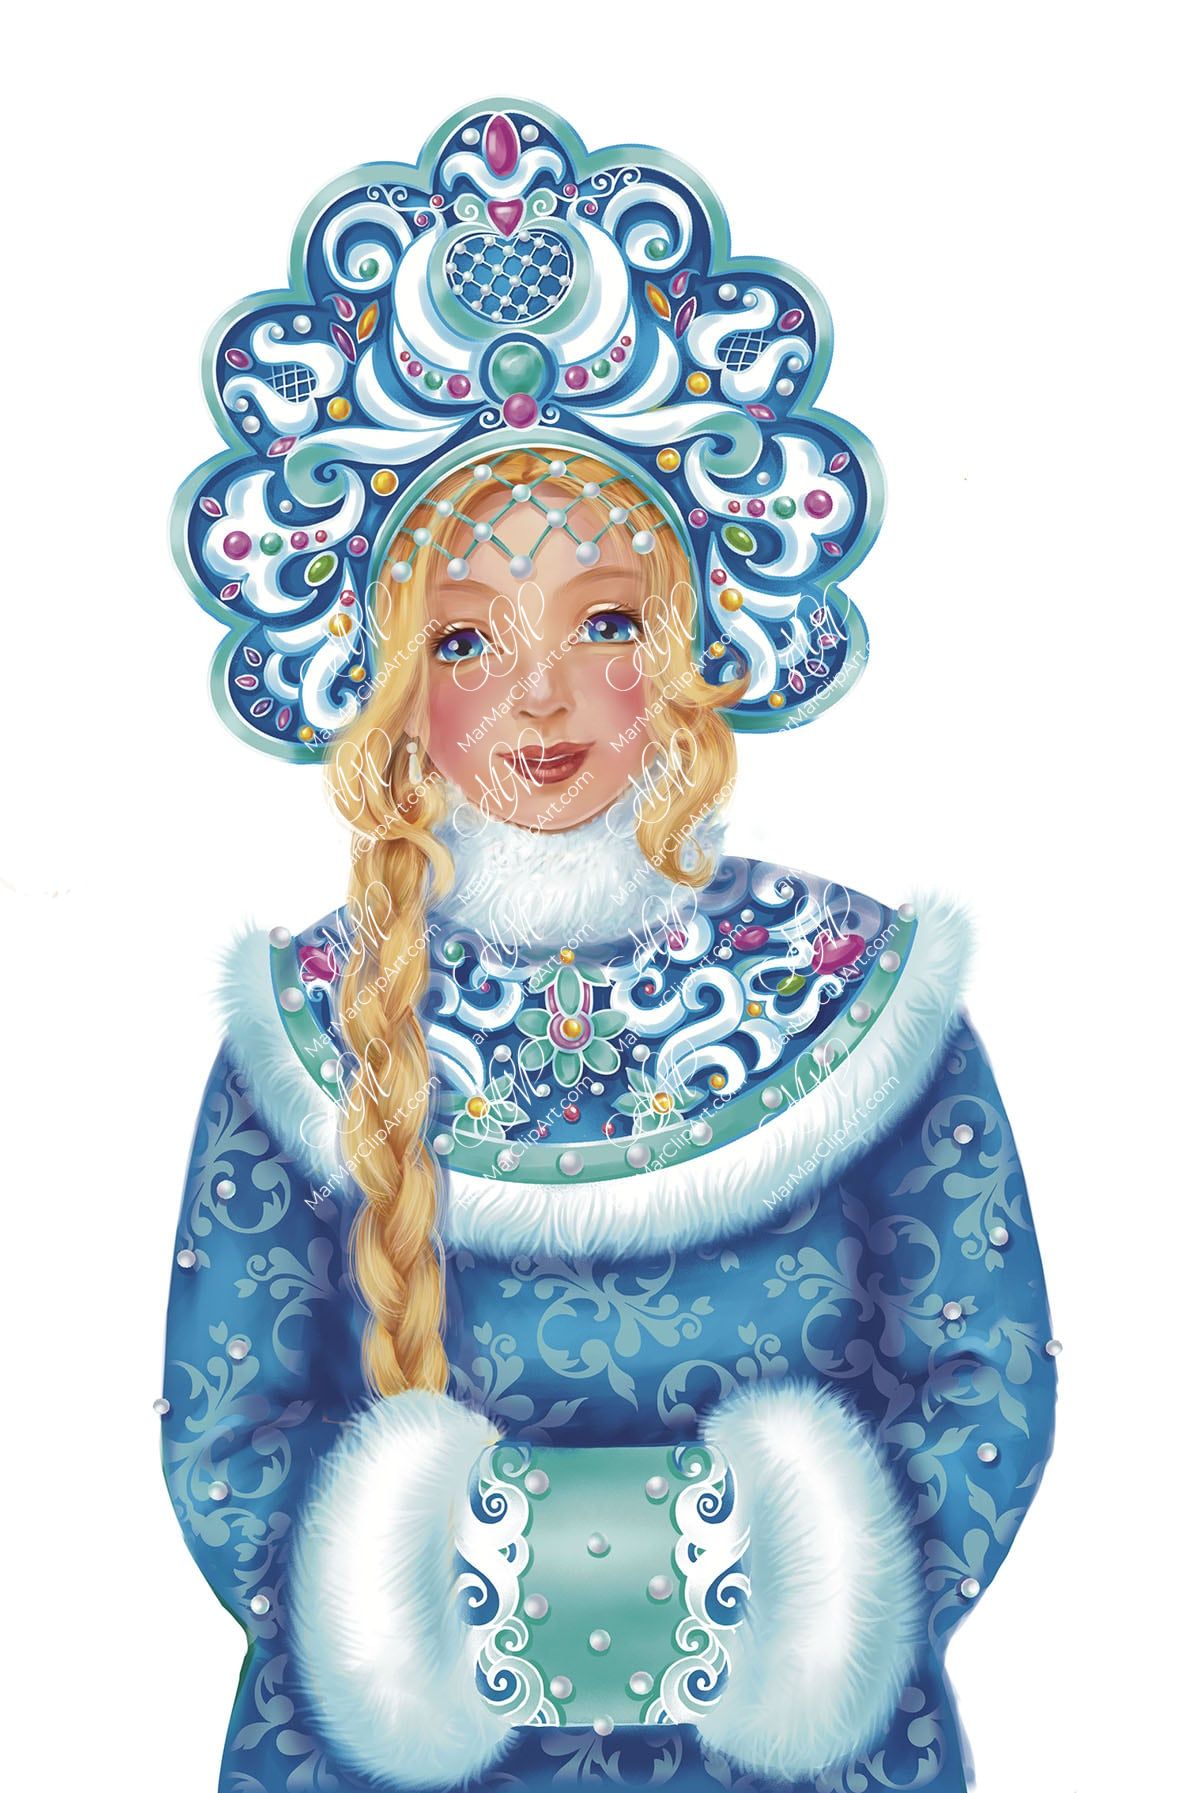 Snow Maiden. Digital illustration on white background with work path. Instant download.